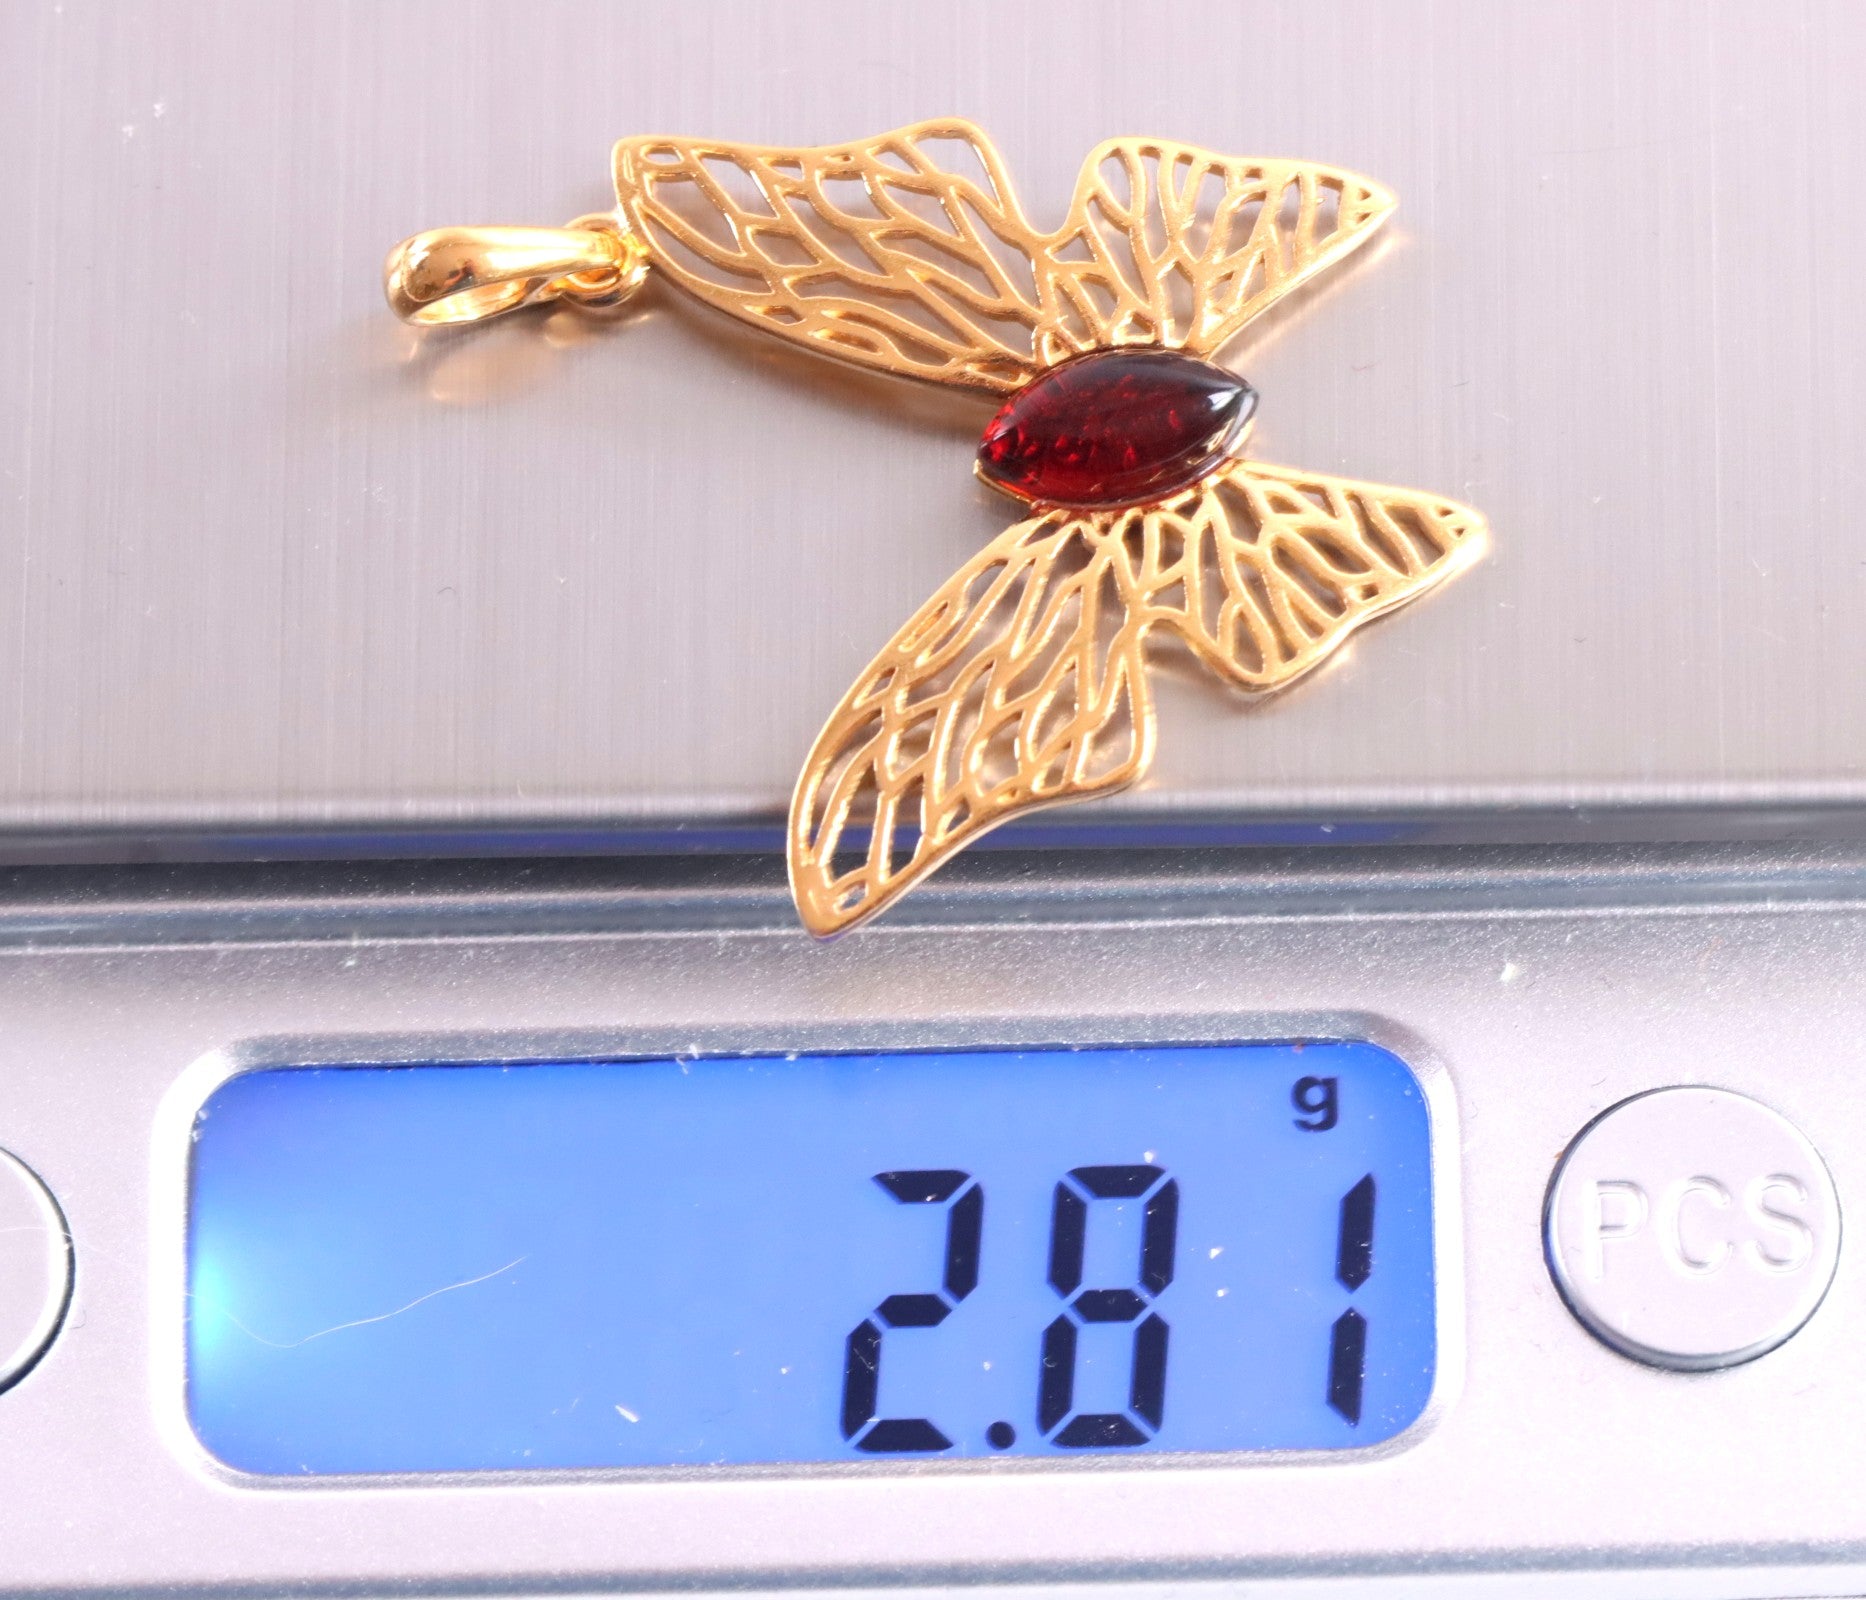 Butterfly pendant on scale